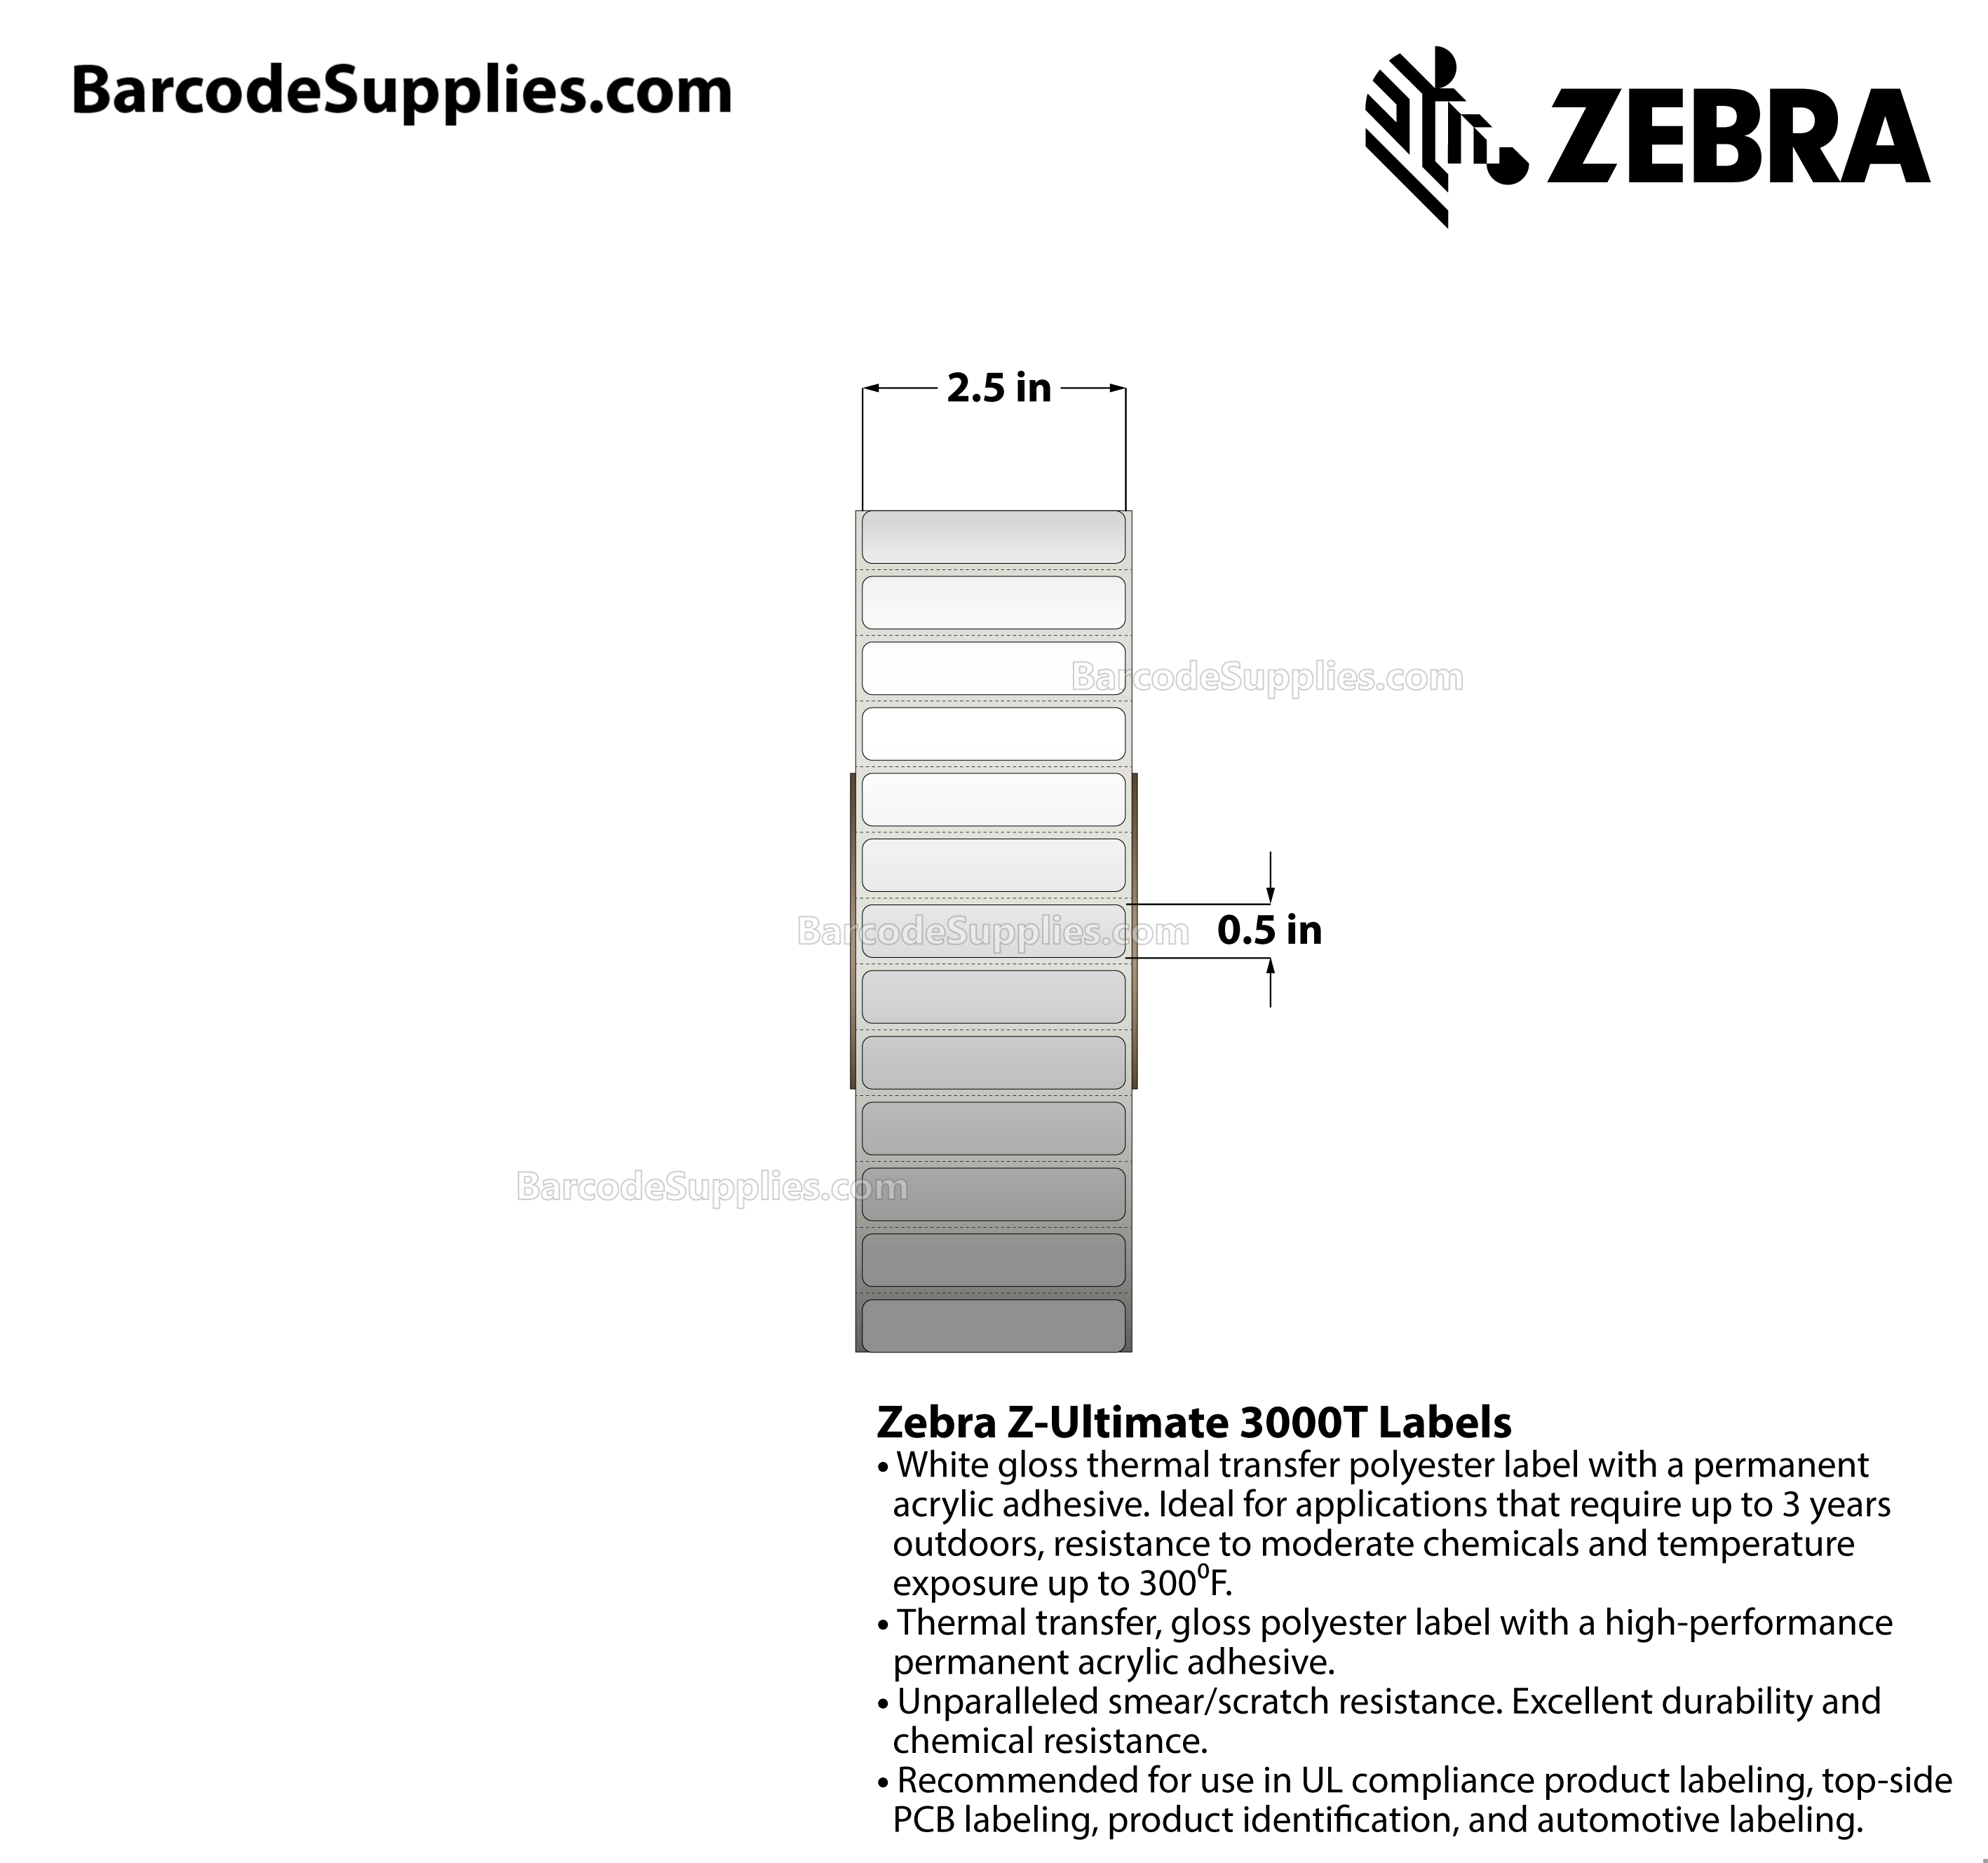 Products 2.5 x 0.5 Thermal Transfer White Z-Ultimate 3000T Labels With Permanent Adhesive - Perforated - 10020 Labels Per Roll - Carton Of 4 Rolls - 40080 Labels Total - MPN: 10011700